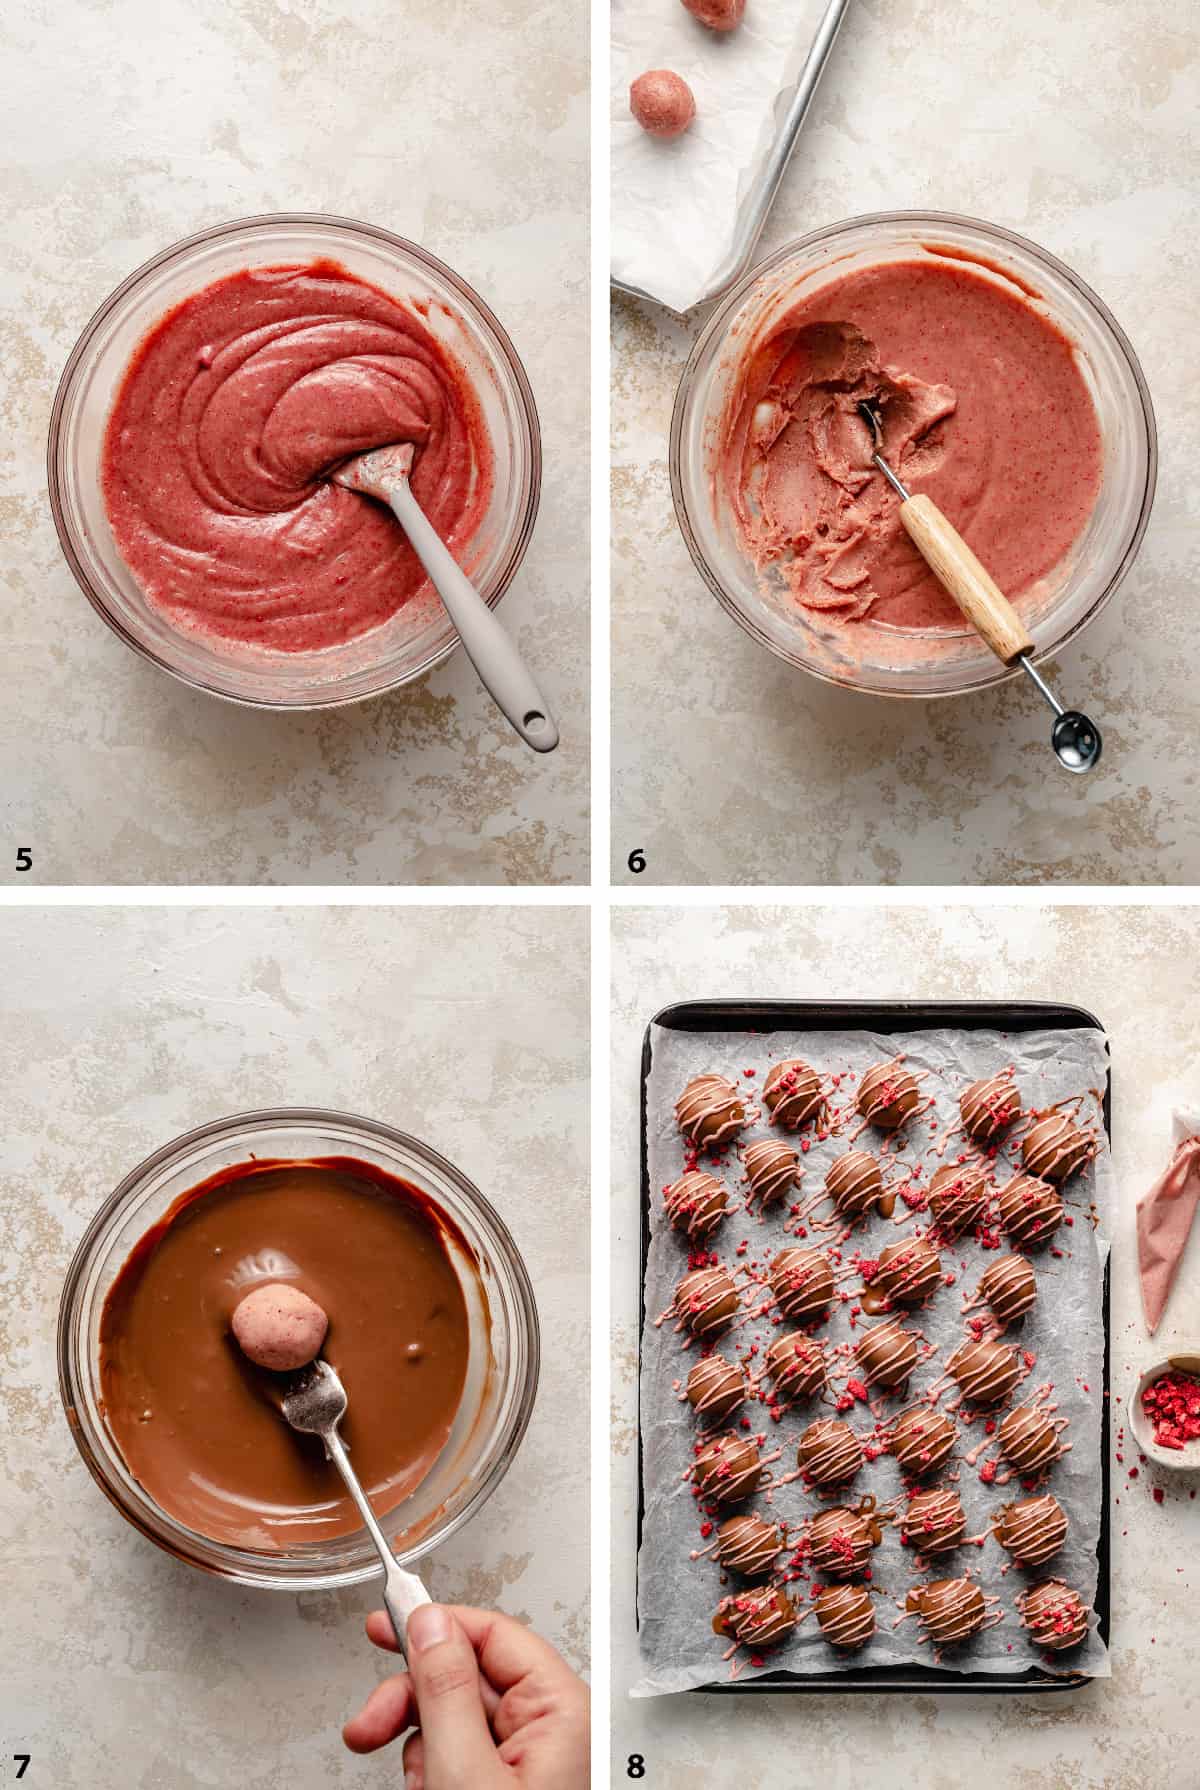 Strawberry truffle ganache in a bowl being scooped, rolled and dipped and decorated on a tray.